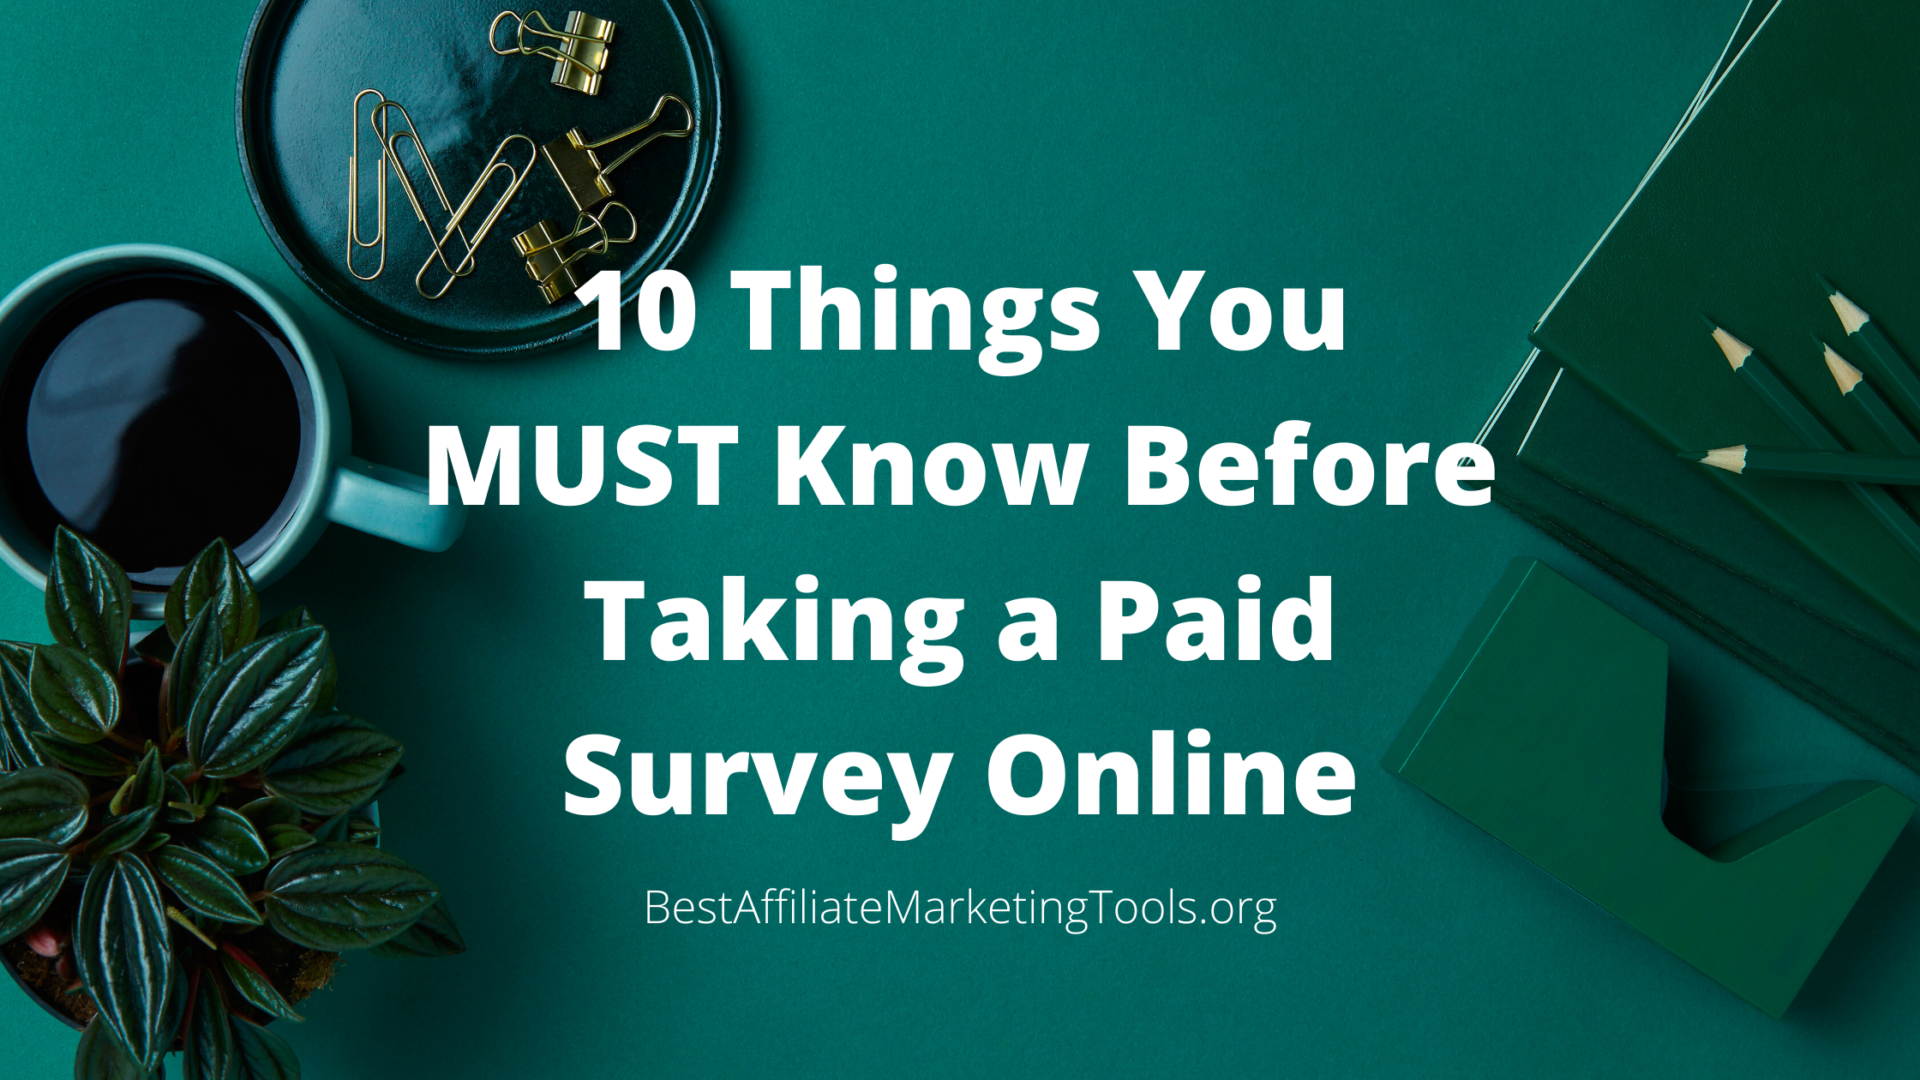 10 Things You MUST Know Before Taking a Paid Survey Online